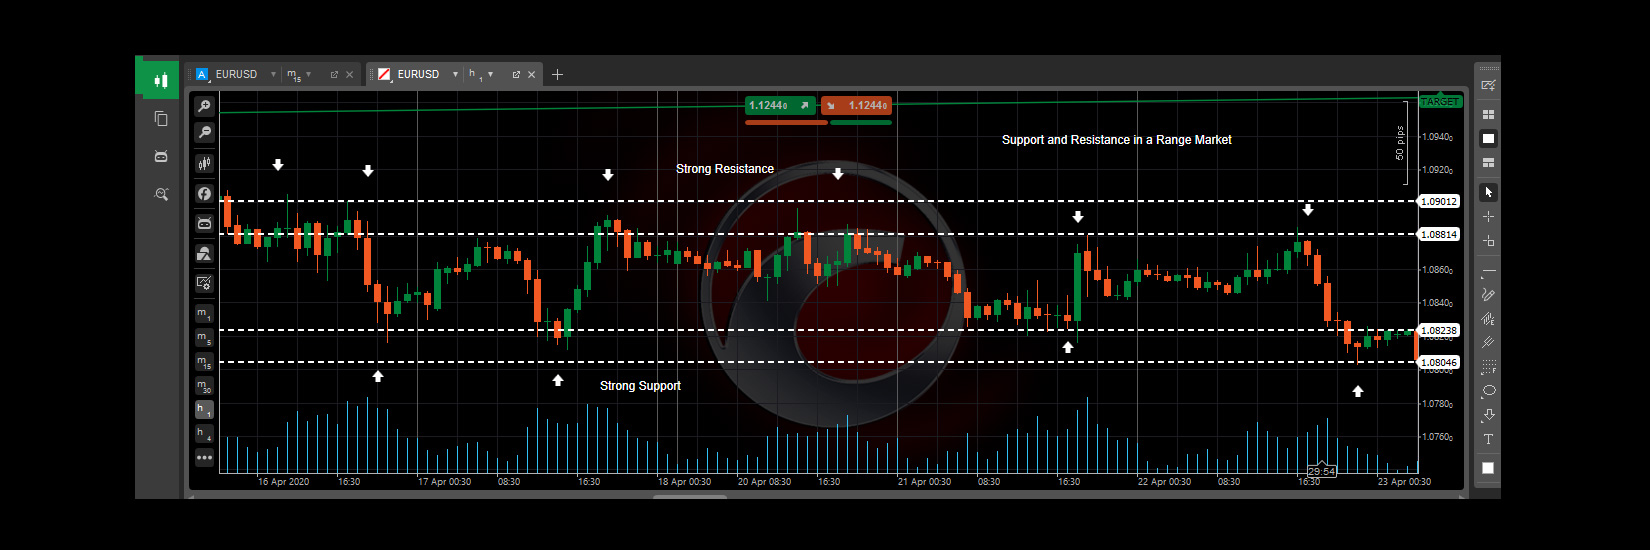 How to trade forex using Range Market Support and Resistance Zones – Simple Forex trading idea